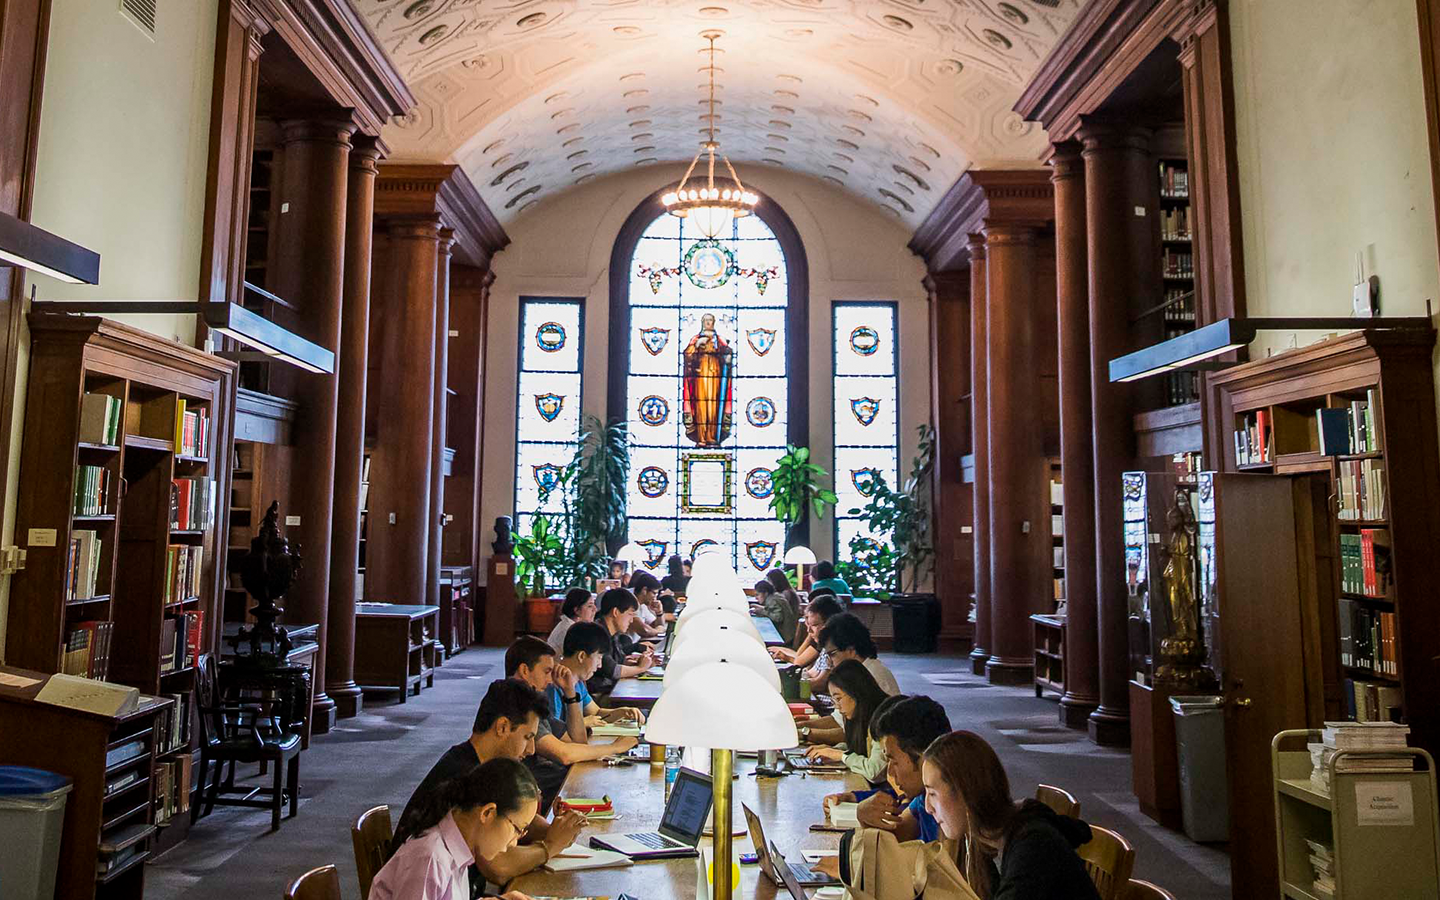 Students studying in Butler library